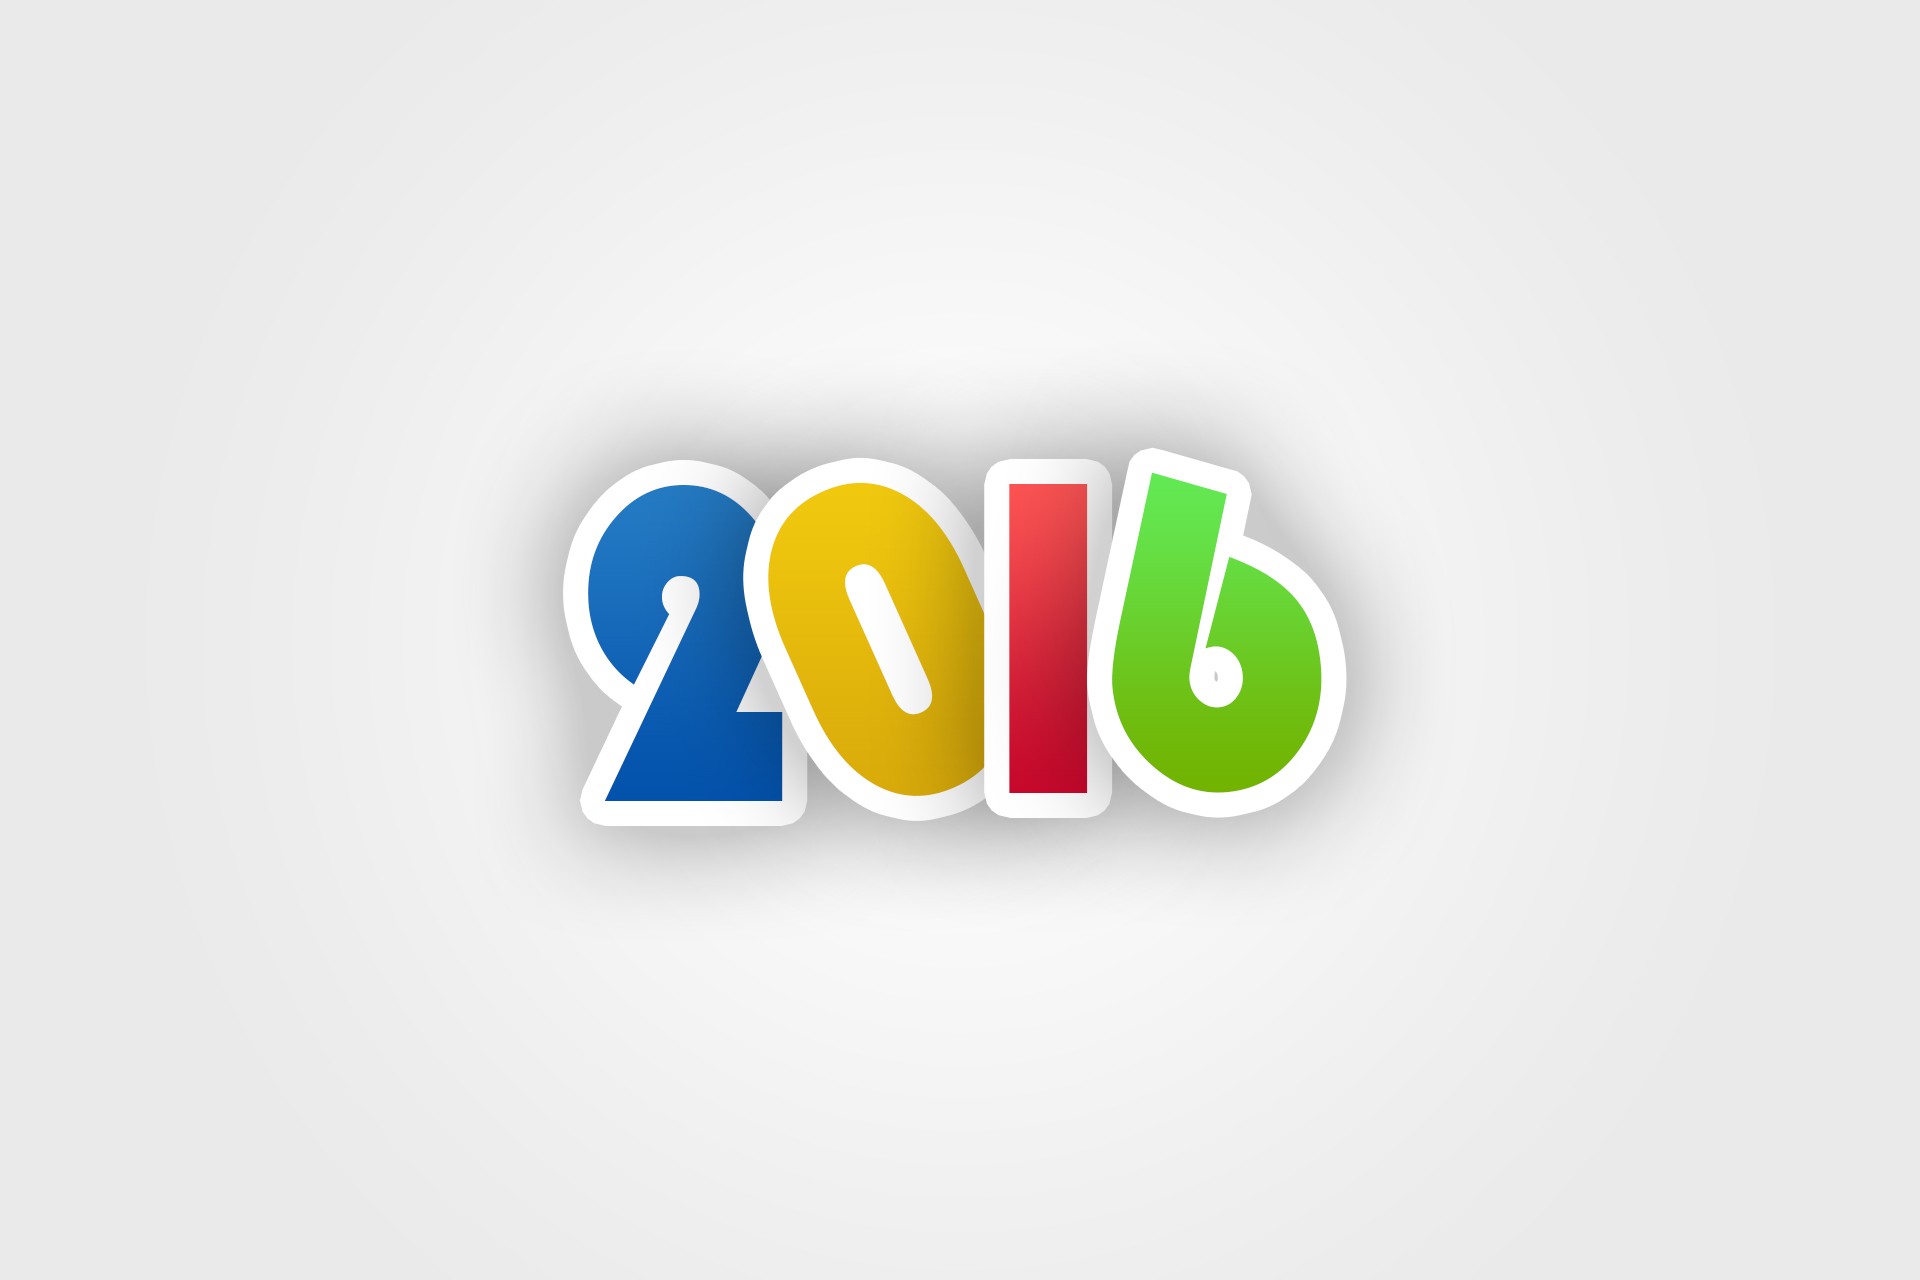 General 1920x1280 New Year minimalism 2016 (year) numbers white background simple background holiday